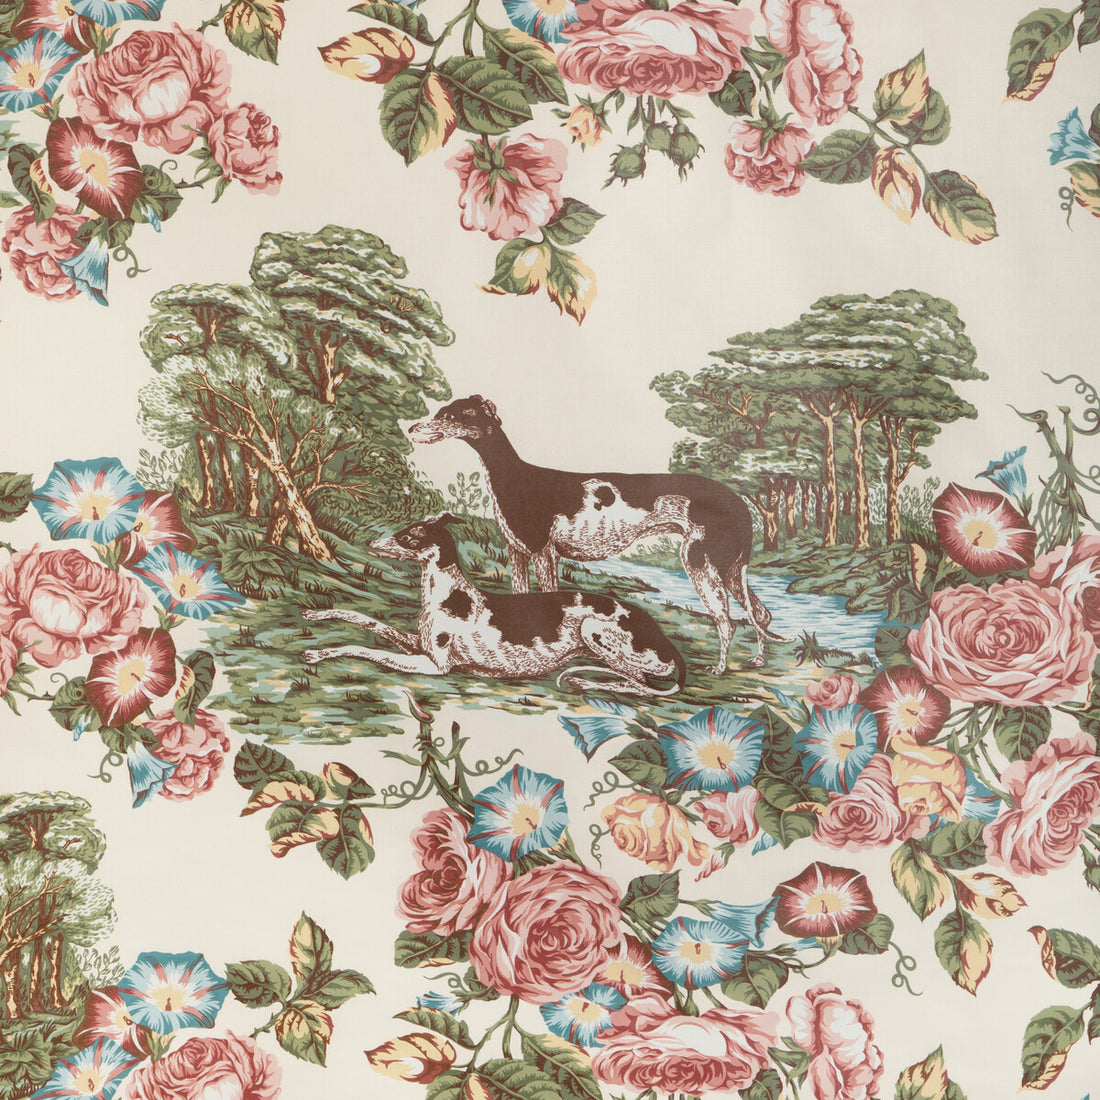 Whippets Cotton fabric in ivory color - pattern 2023125.1.0 - by Lee Jofa in the Lee Jofa 200 collection